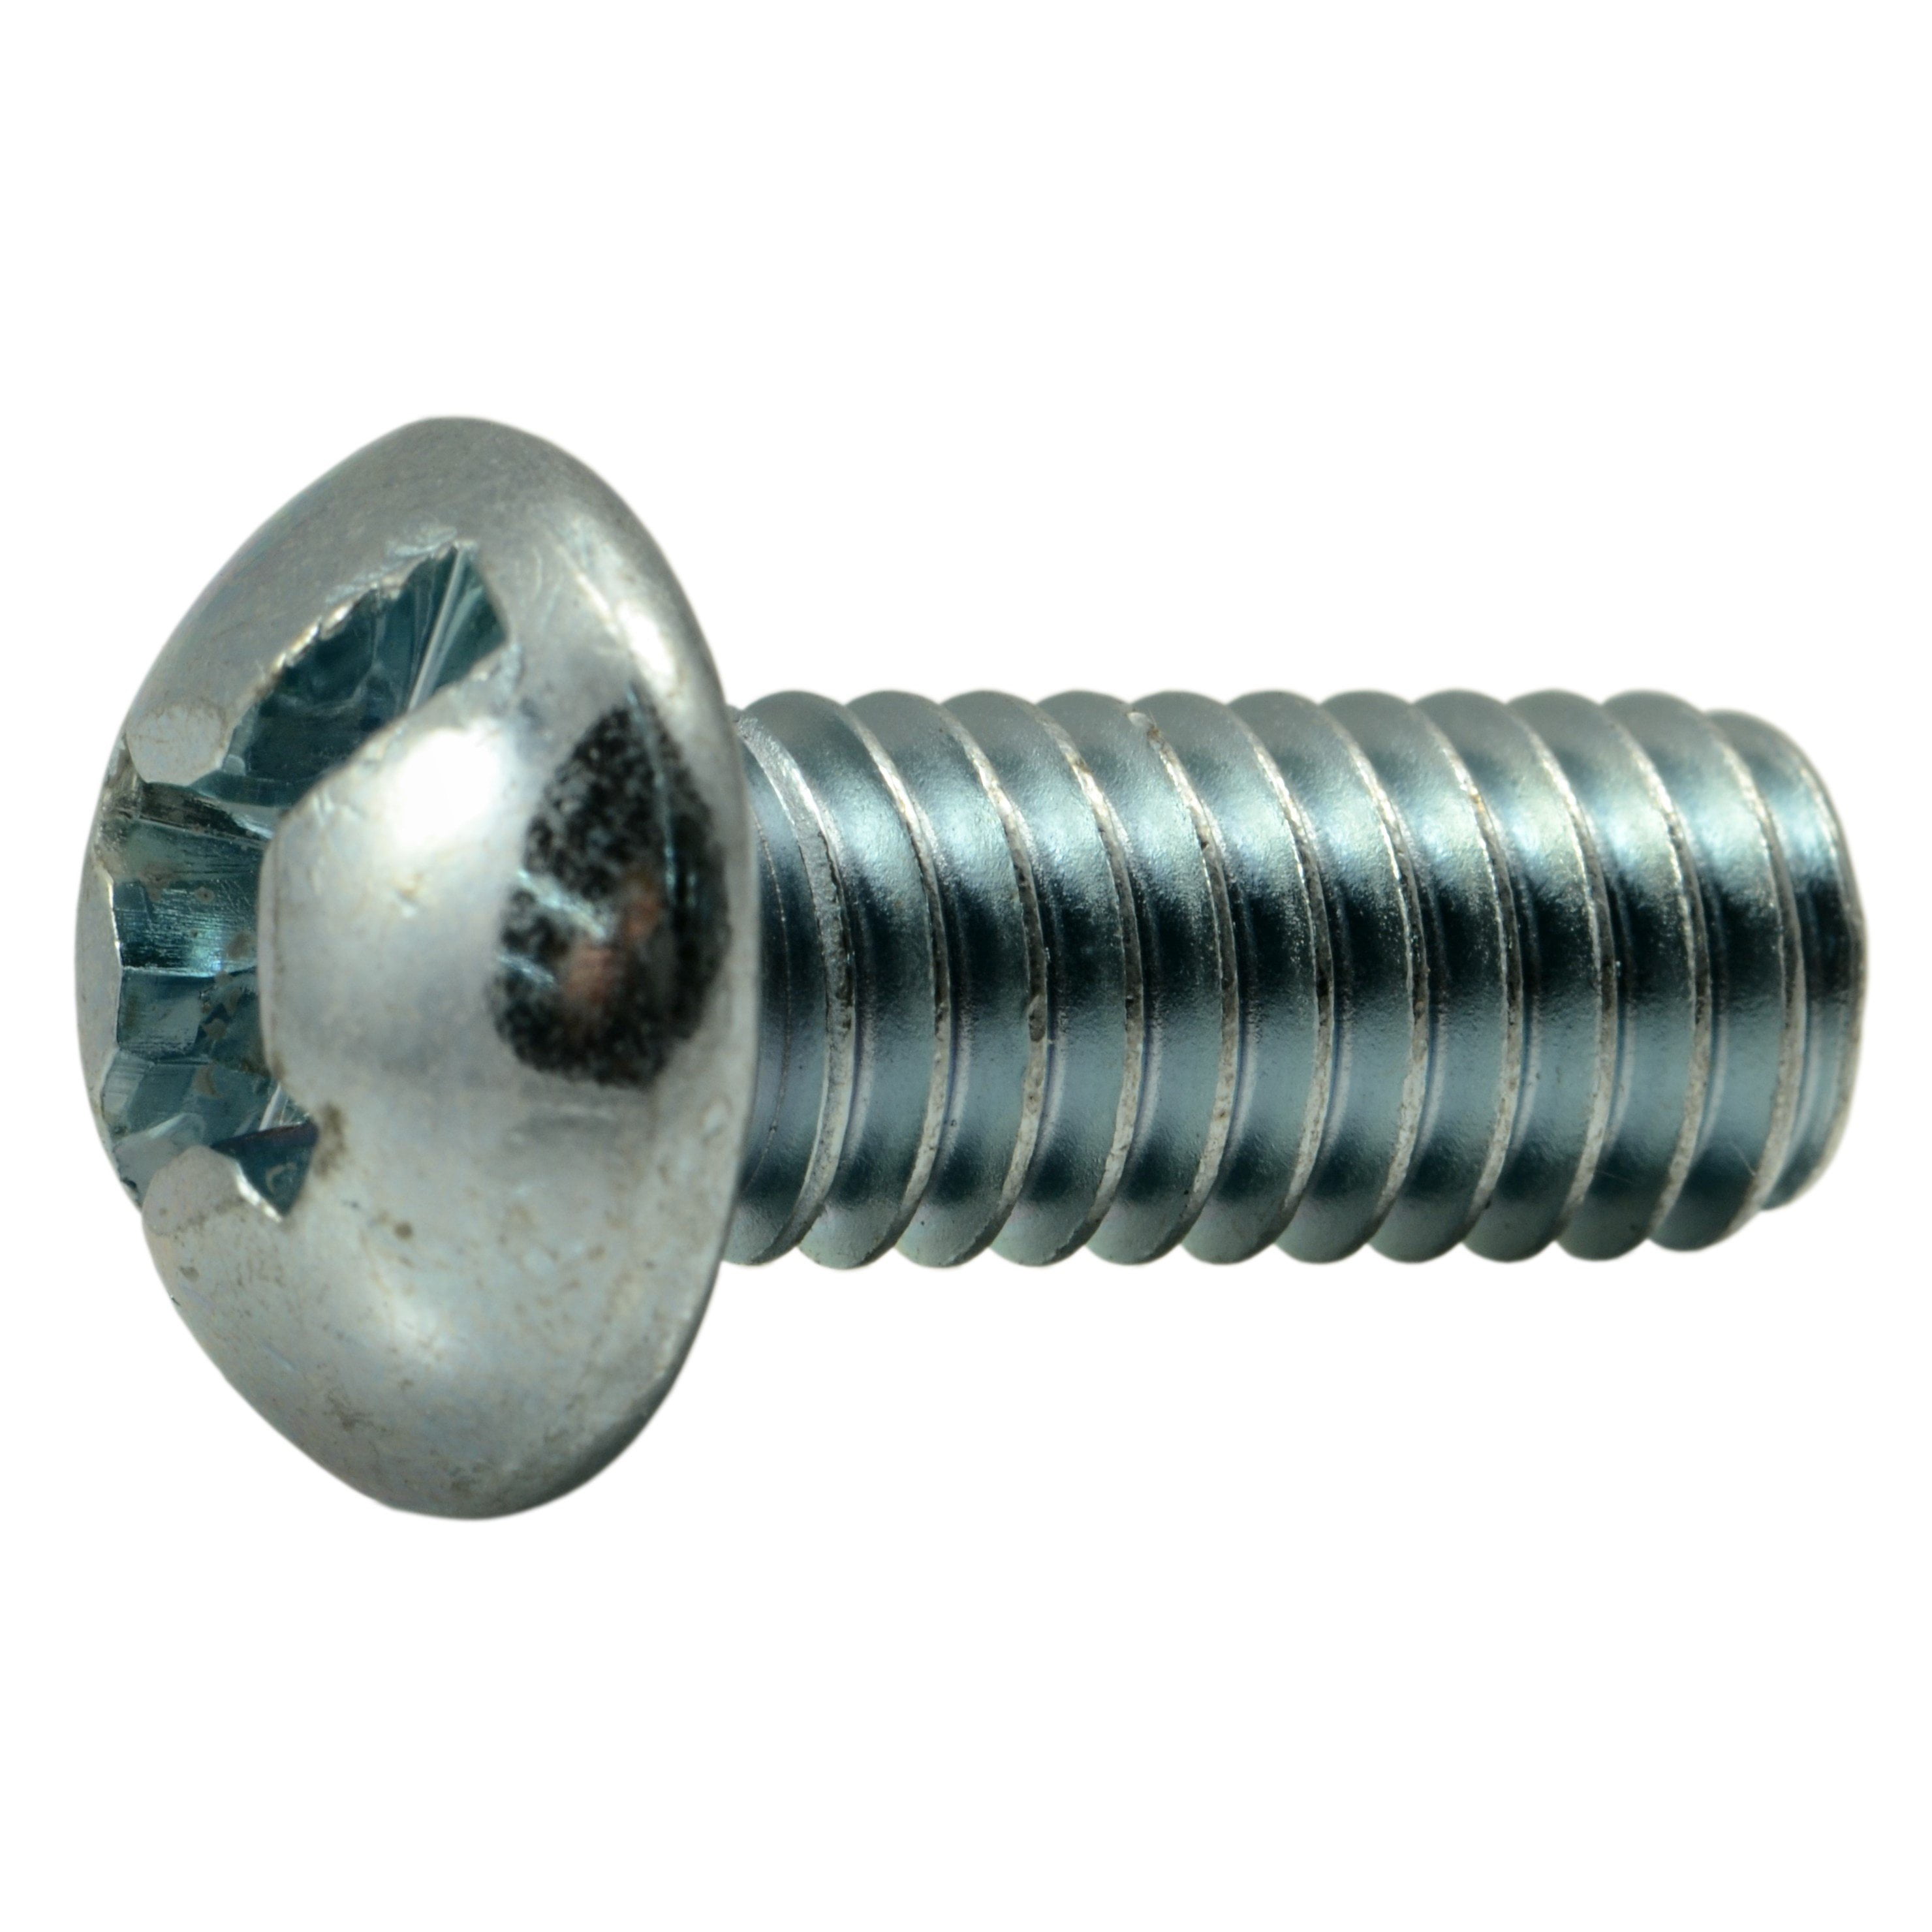 8-32 X 3/4" Round Head Slotted Phillips Combo Zinc Full Thread Screws Qty.200 